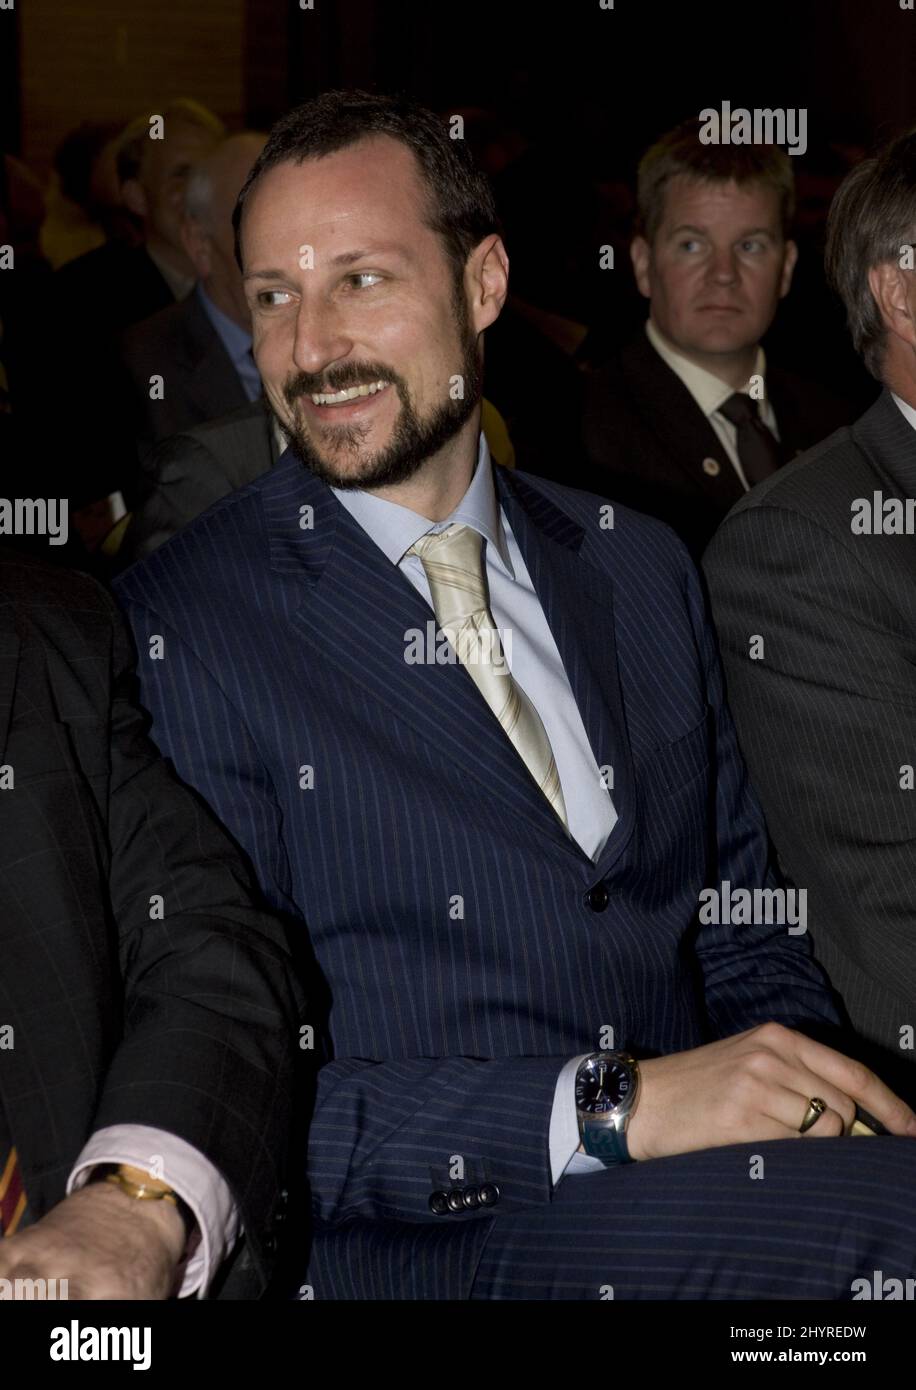 Crown Prince Haakon on the third day of an official to Chile, attends a seminar on aqua culture at The Hotel Melia in Puerto Varas in Southern Chile. Stock Photo